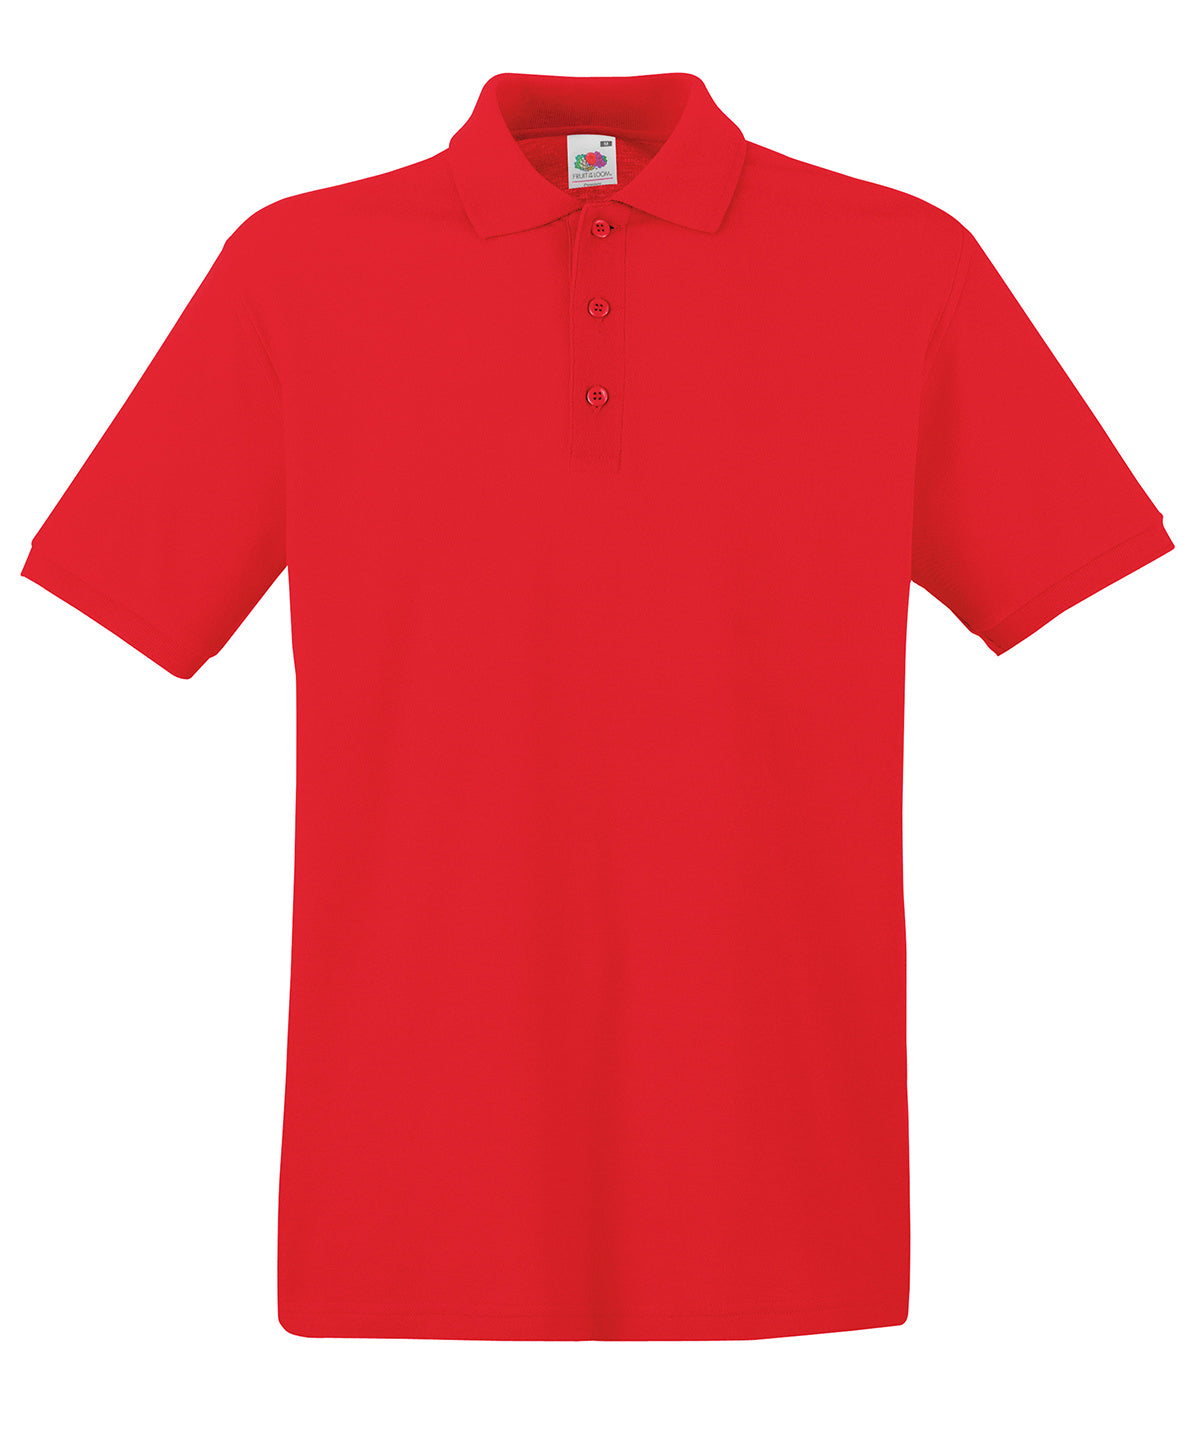 Red - Premium polo Polos Fruit of the Loom 2022 Spring Edit, Fruit of the Loom Polos, Must Haves, New Colours For 2022, Plus Sizes, Polos & Casual, Raladeal - Recently Added Schoolwear Centres